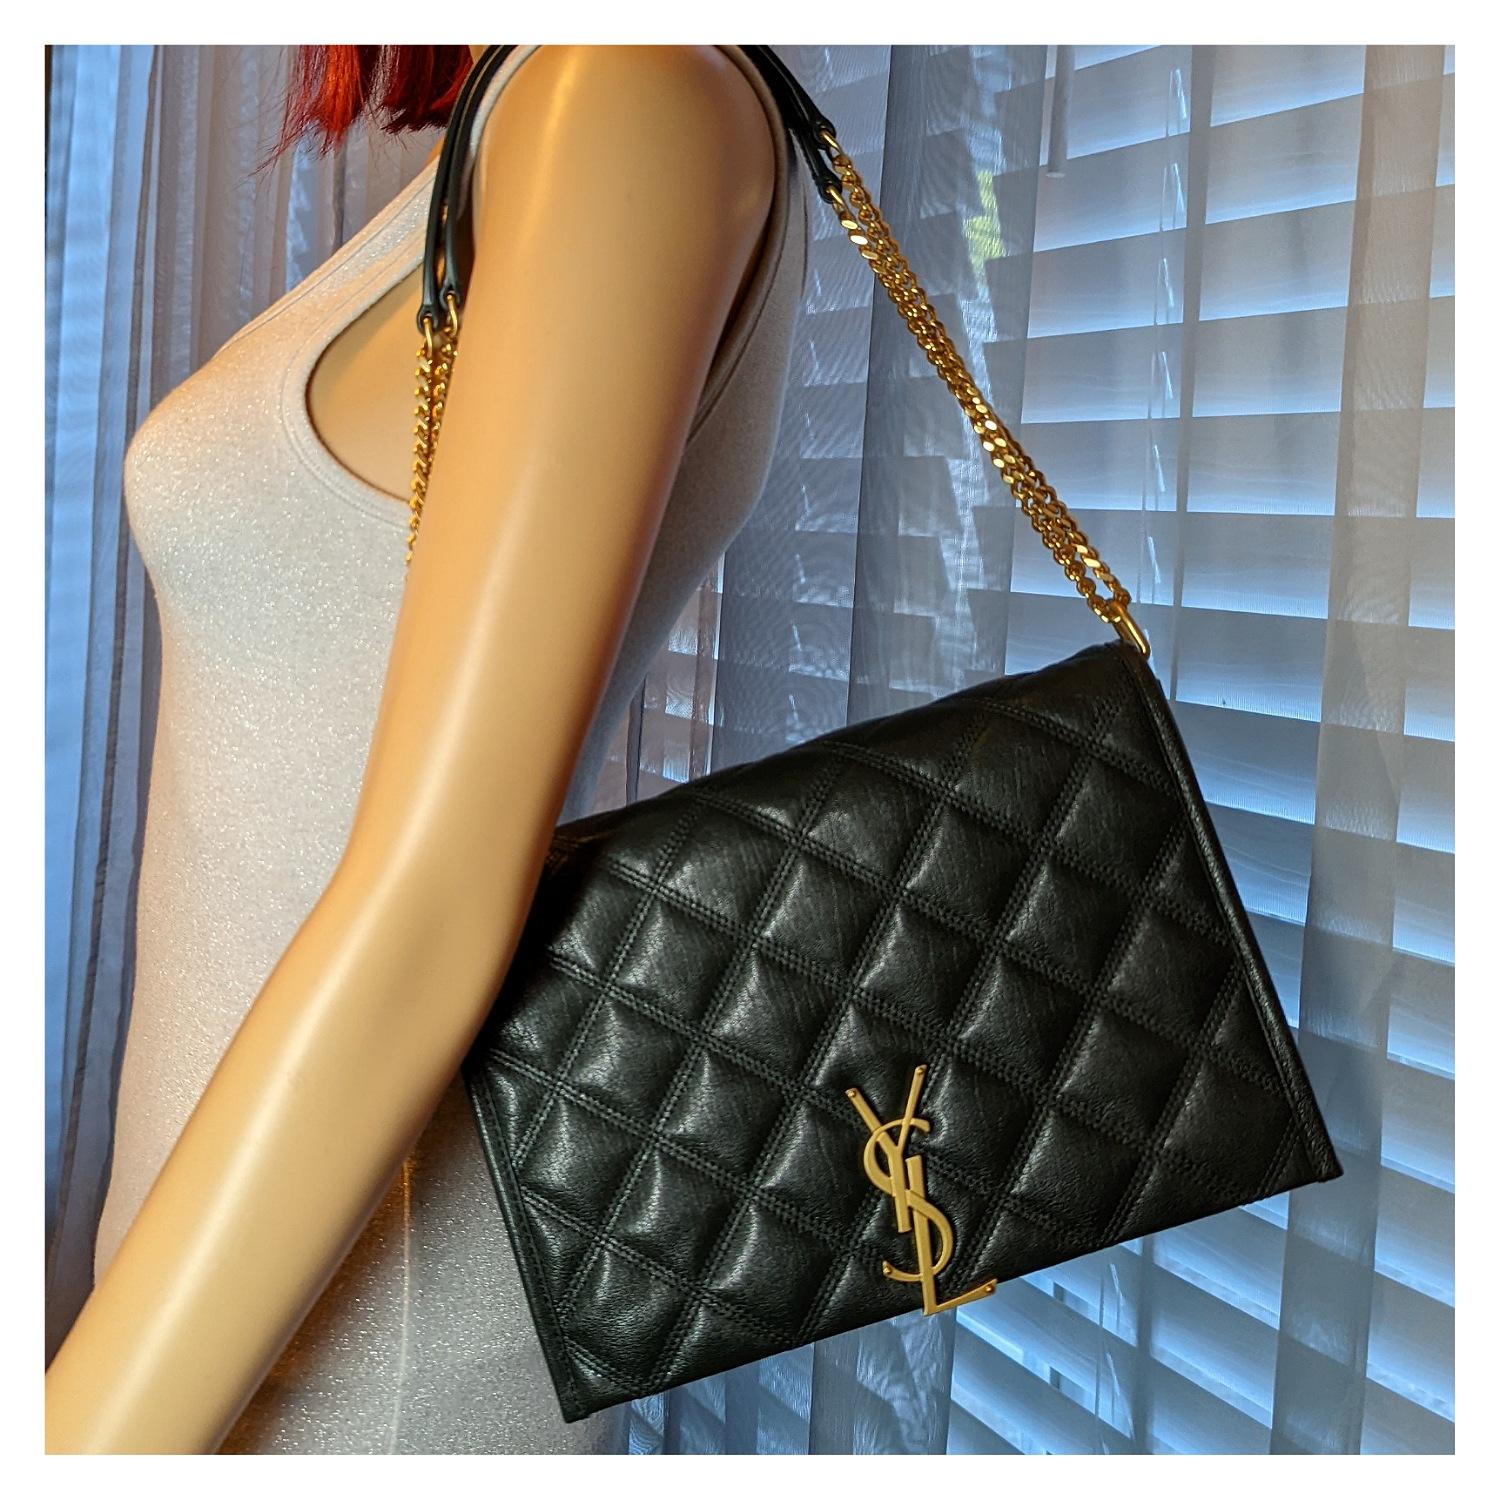 Saint Laurent Becky Mini Chain Bag in carré-quilted lambskin leather in dark green. The bag features polished gold hardware, chain shoulder straps and a gold YSL emblem on the front flap. The flap opens to a black fabric interior with zipper and